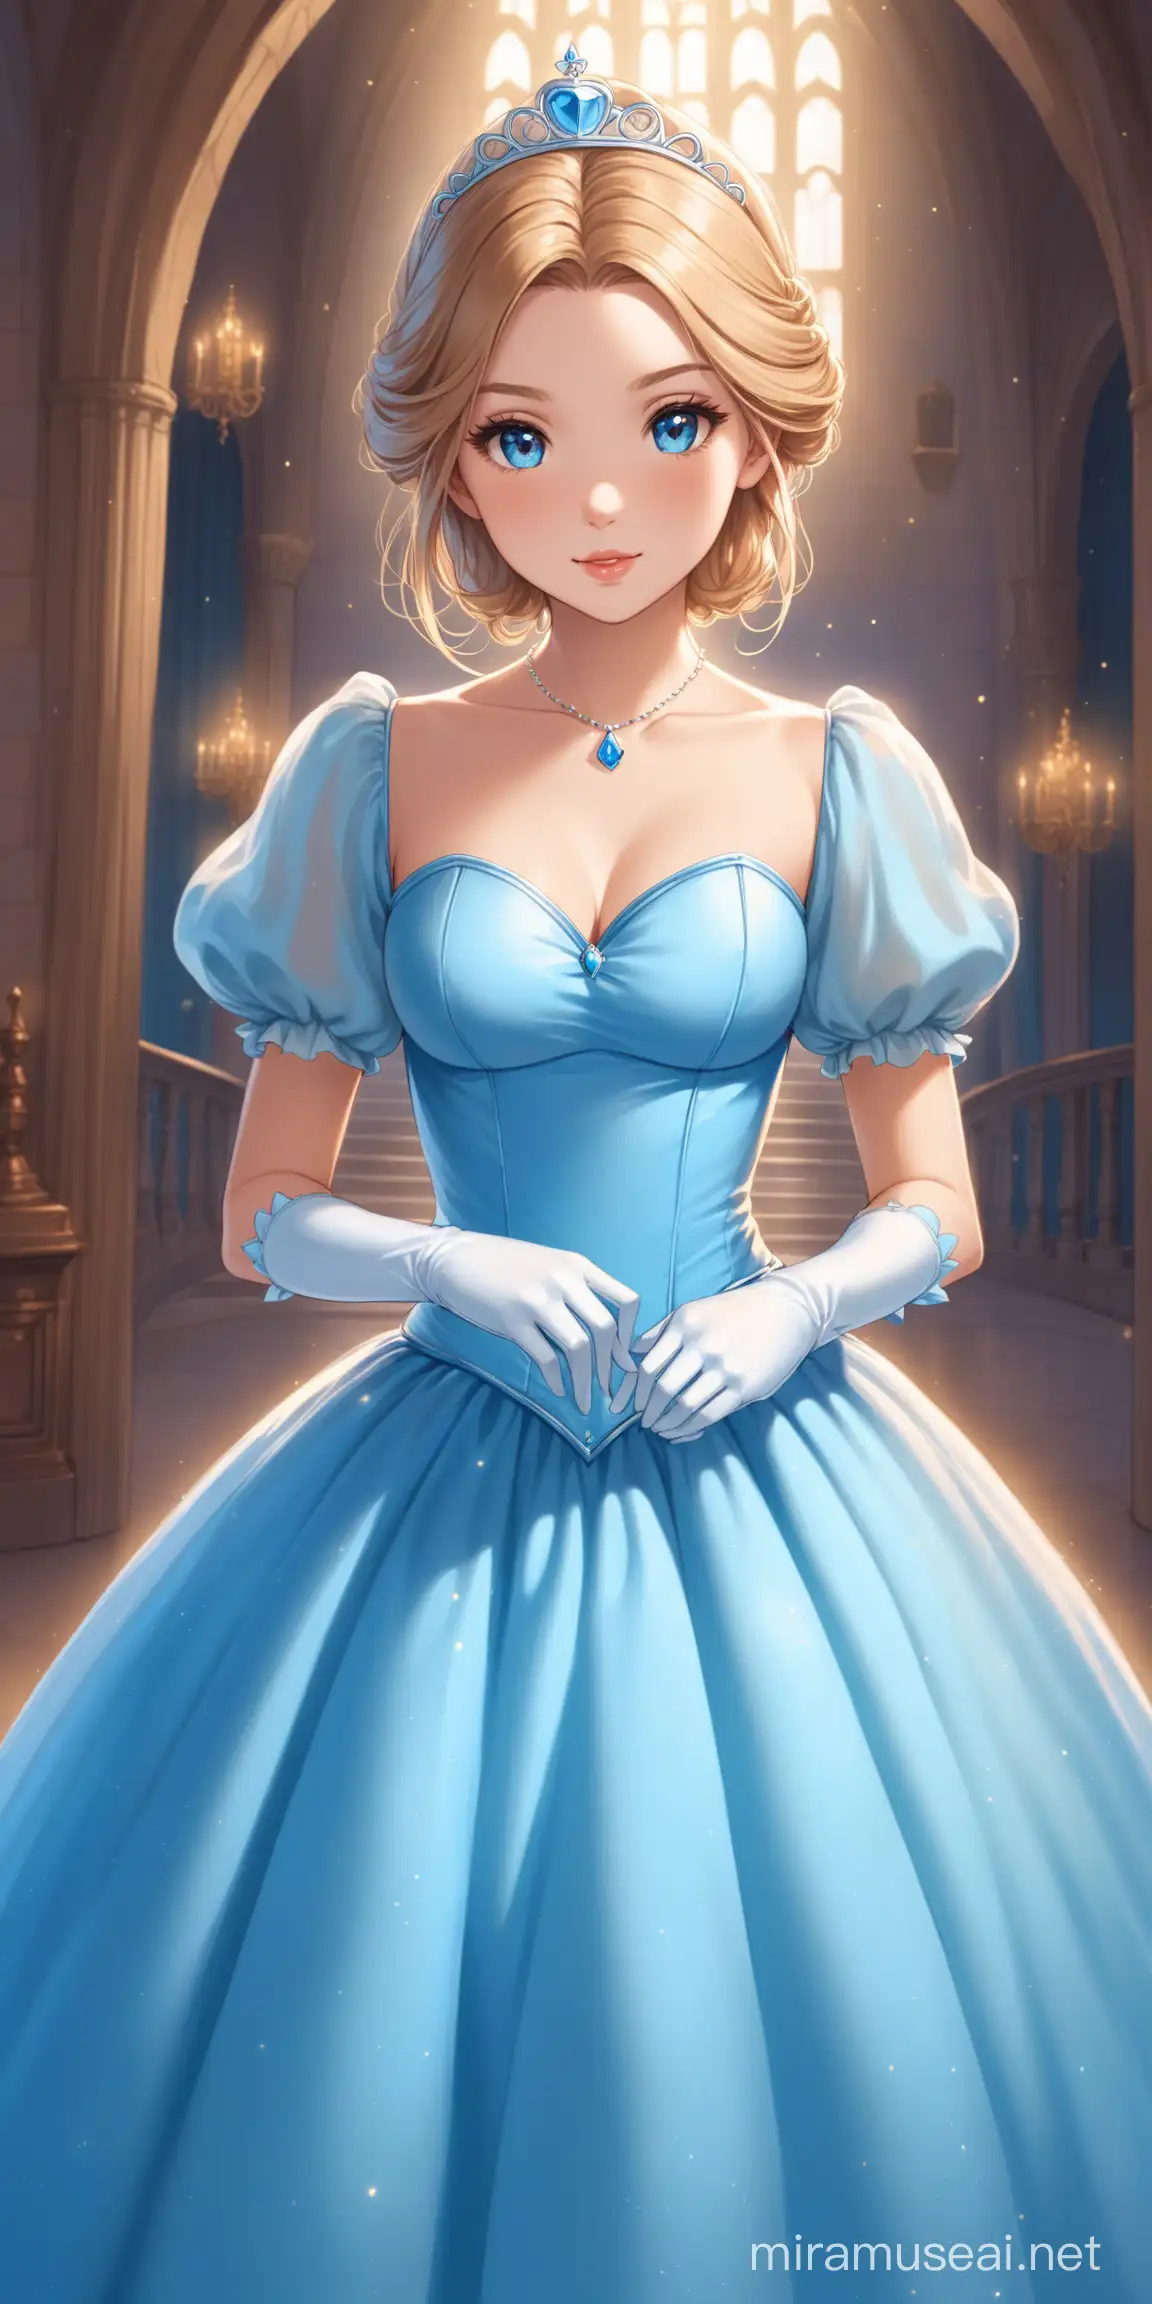 Cinderella themed girl in elegant blue ballgown with puffed sleeves and gloves